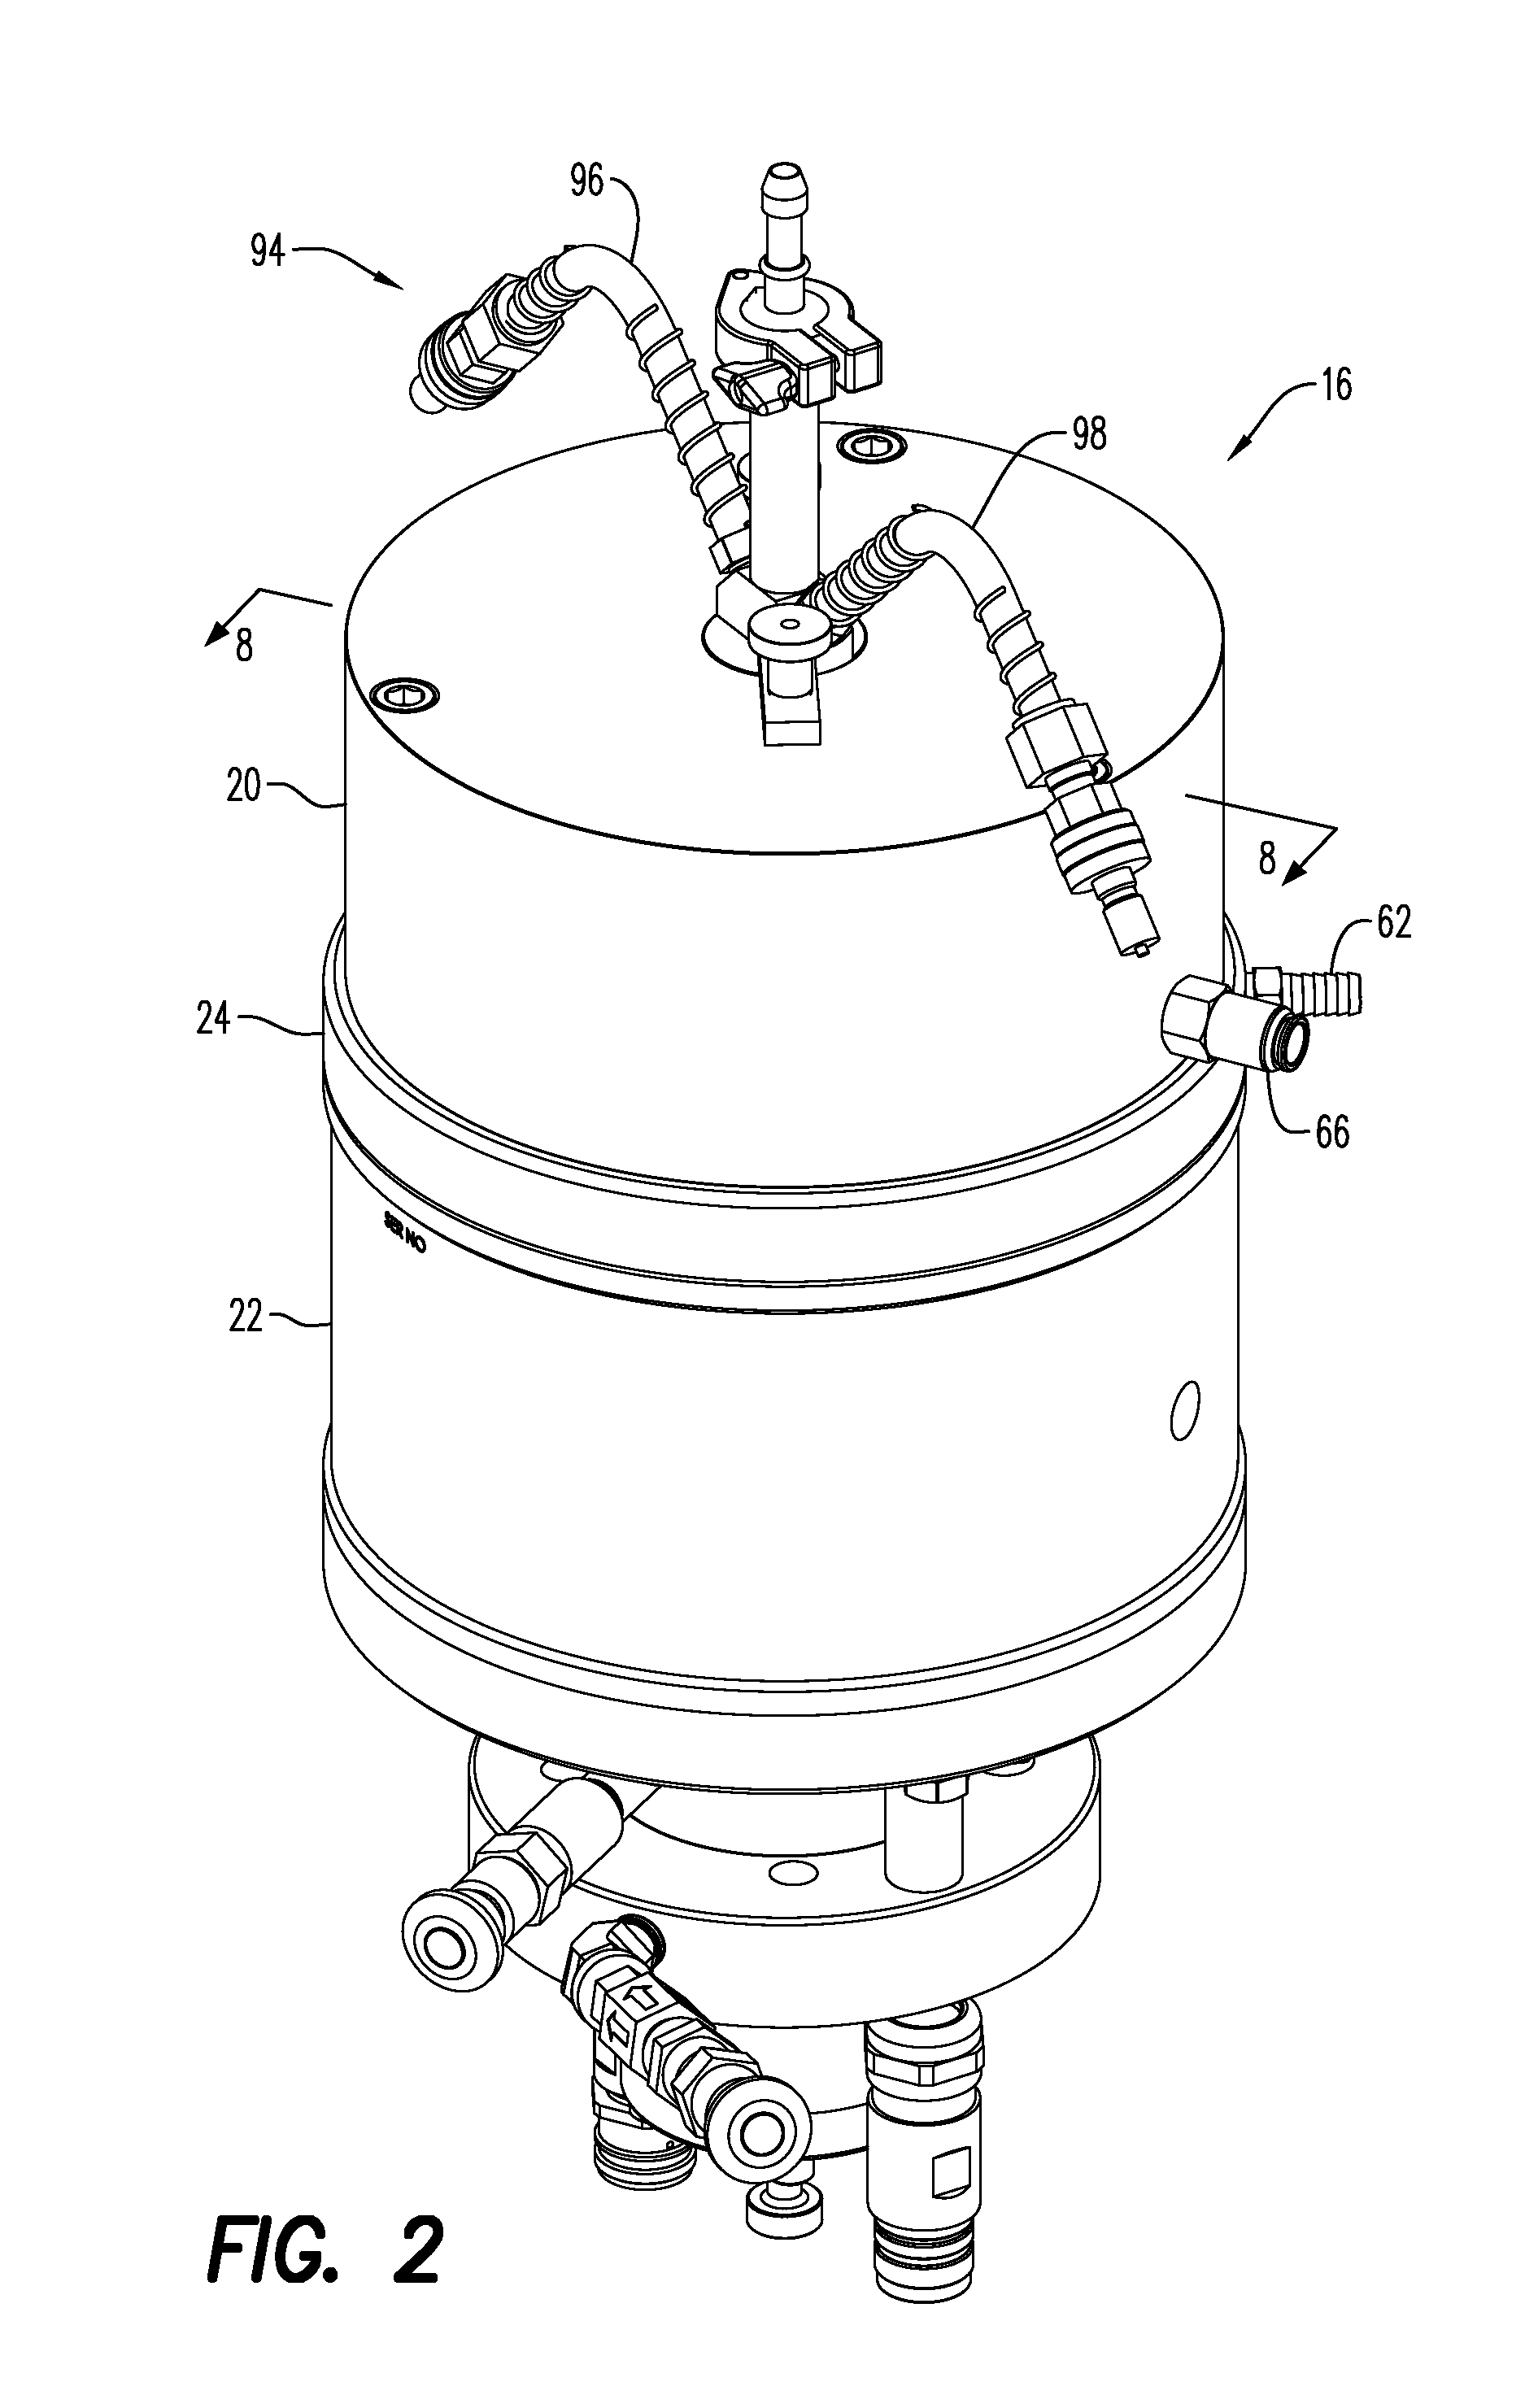 Centrifugation systems with non-contact seal assemblies